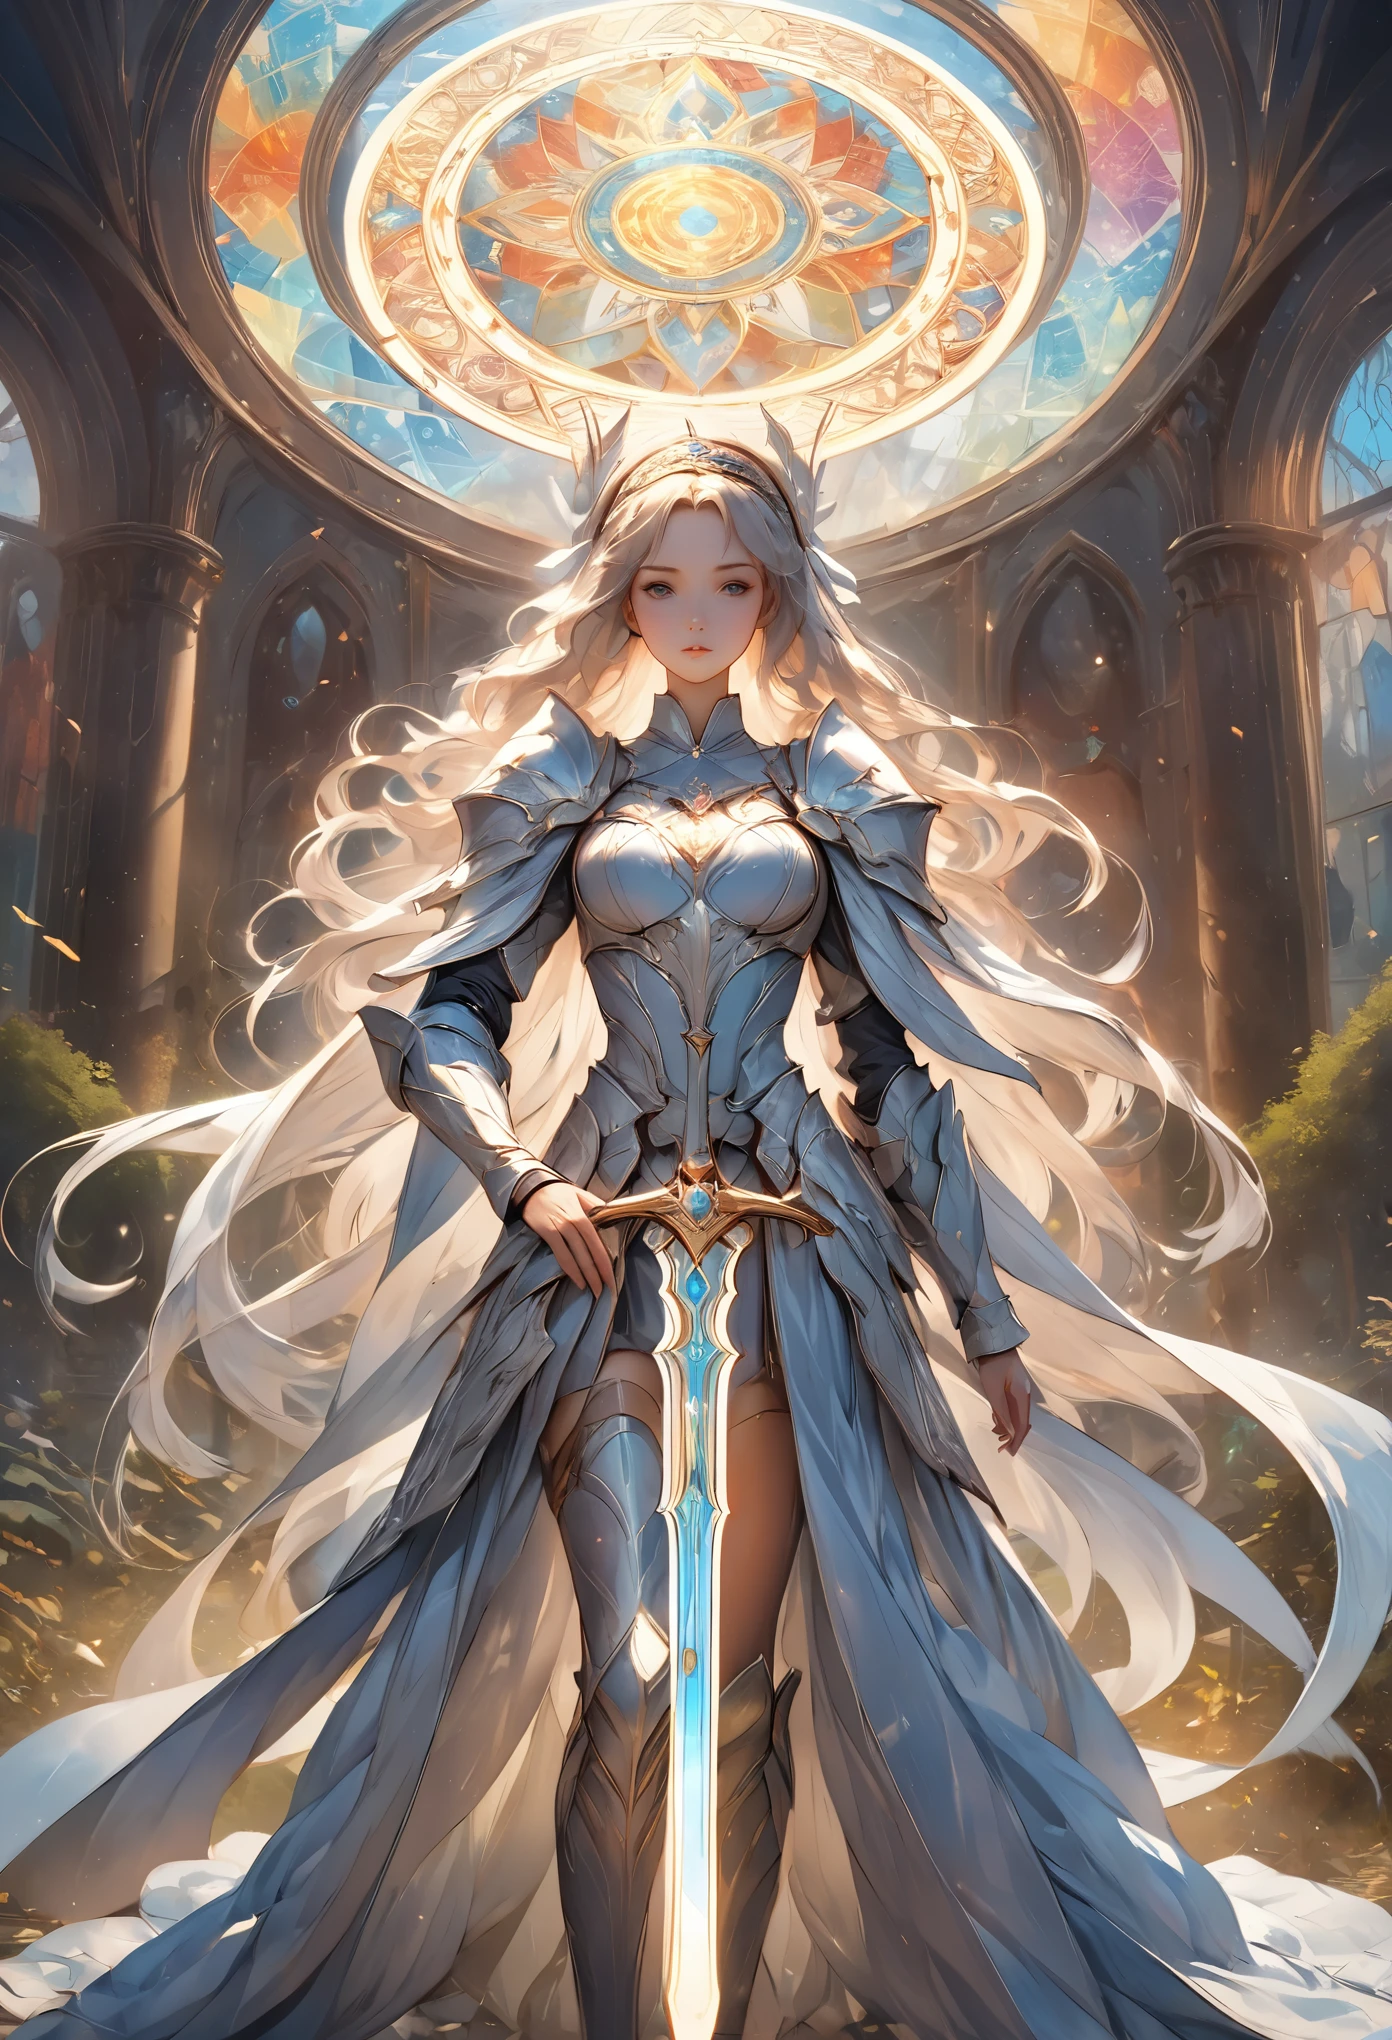 8K resolution, masterpiece, Highest quality, Award-winning works, unrealistic, sole sexy lady, healthy shaped body, 25 years old, white wavy long hair, hair band, big firm bouncing bust, ancient roman military commander's armor, Pure white armor with a complex structure, royal coat of arms, Hold up Excalibur with both hands, elegant, Very detailed, Digital Painting, artステーション, コンセプトart, Smooth, Sharp focus, shape, artジャム、Greg Rutkowski、Alphonse Mucha、William Adolphe Bouguereau、art：Stephanie Law , Magnificent royal background, Royal Jewel, nature, Full Shot, Symmetric, Greg Rutkowski, Charlie Bowwater, beep, Unreal 5, Surreal, Dynamic Lighting, ファンタジーart, Complex colors, Colorful magic circle, flash,  dynamic sexy poses